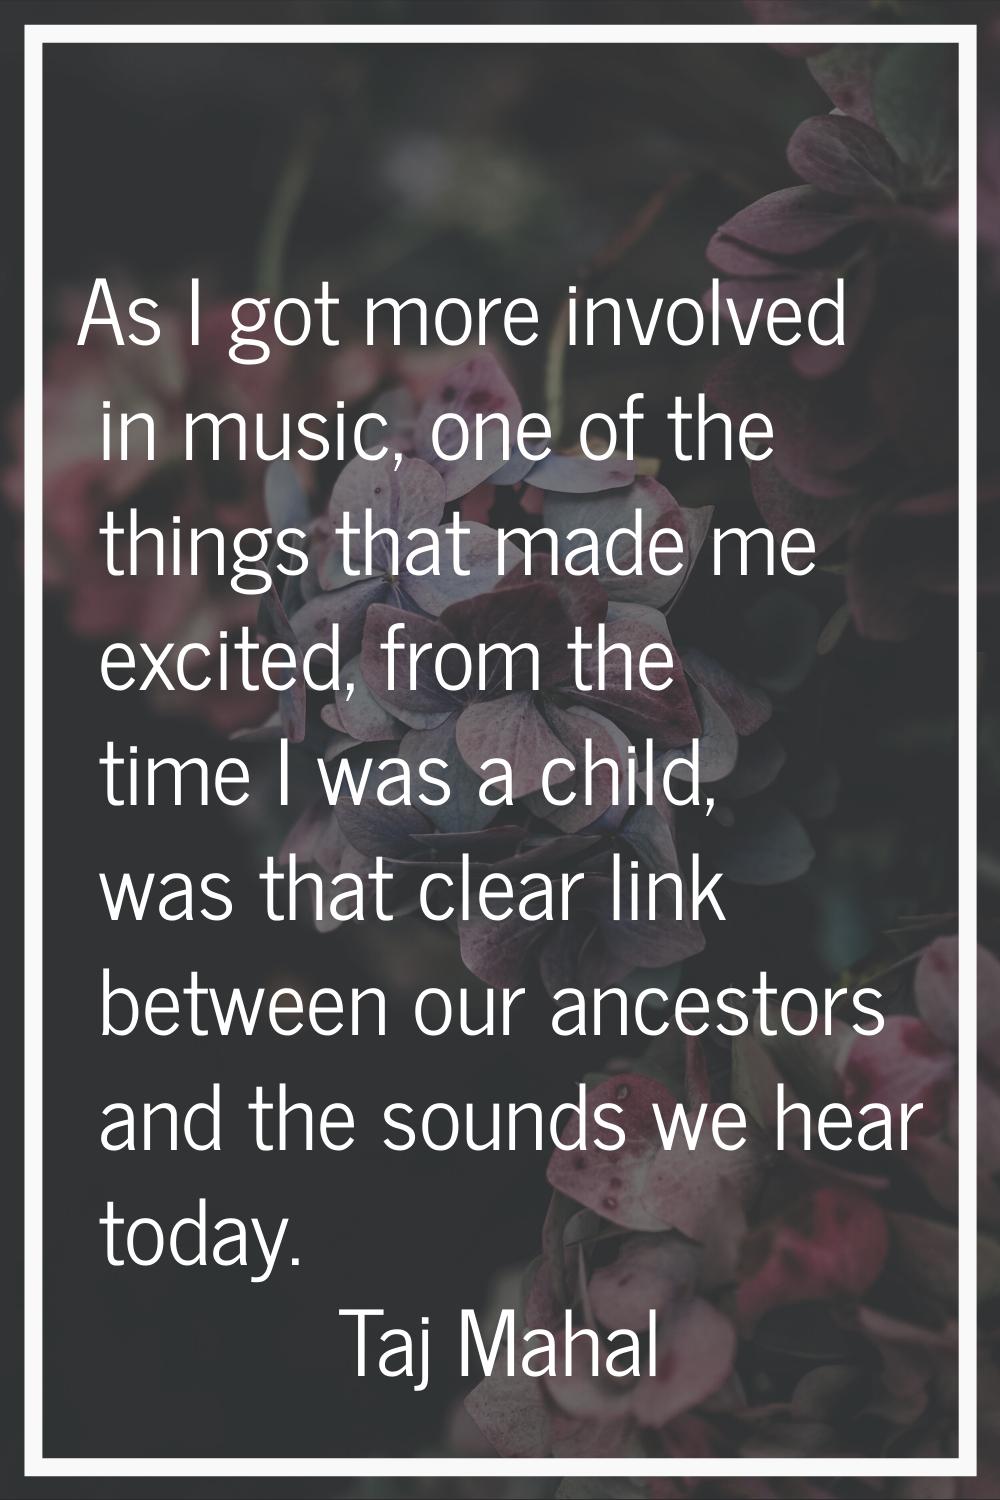 As I got more involved in music, one of the things that made me excited, from the time I was a chil